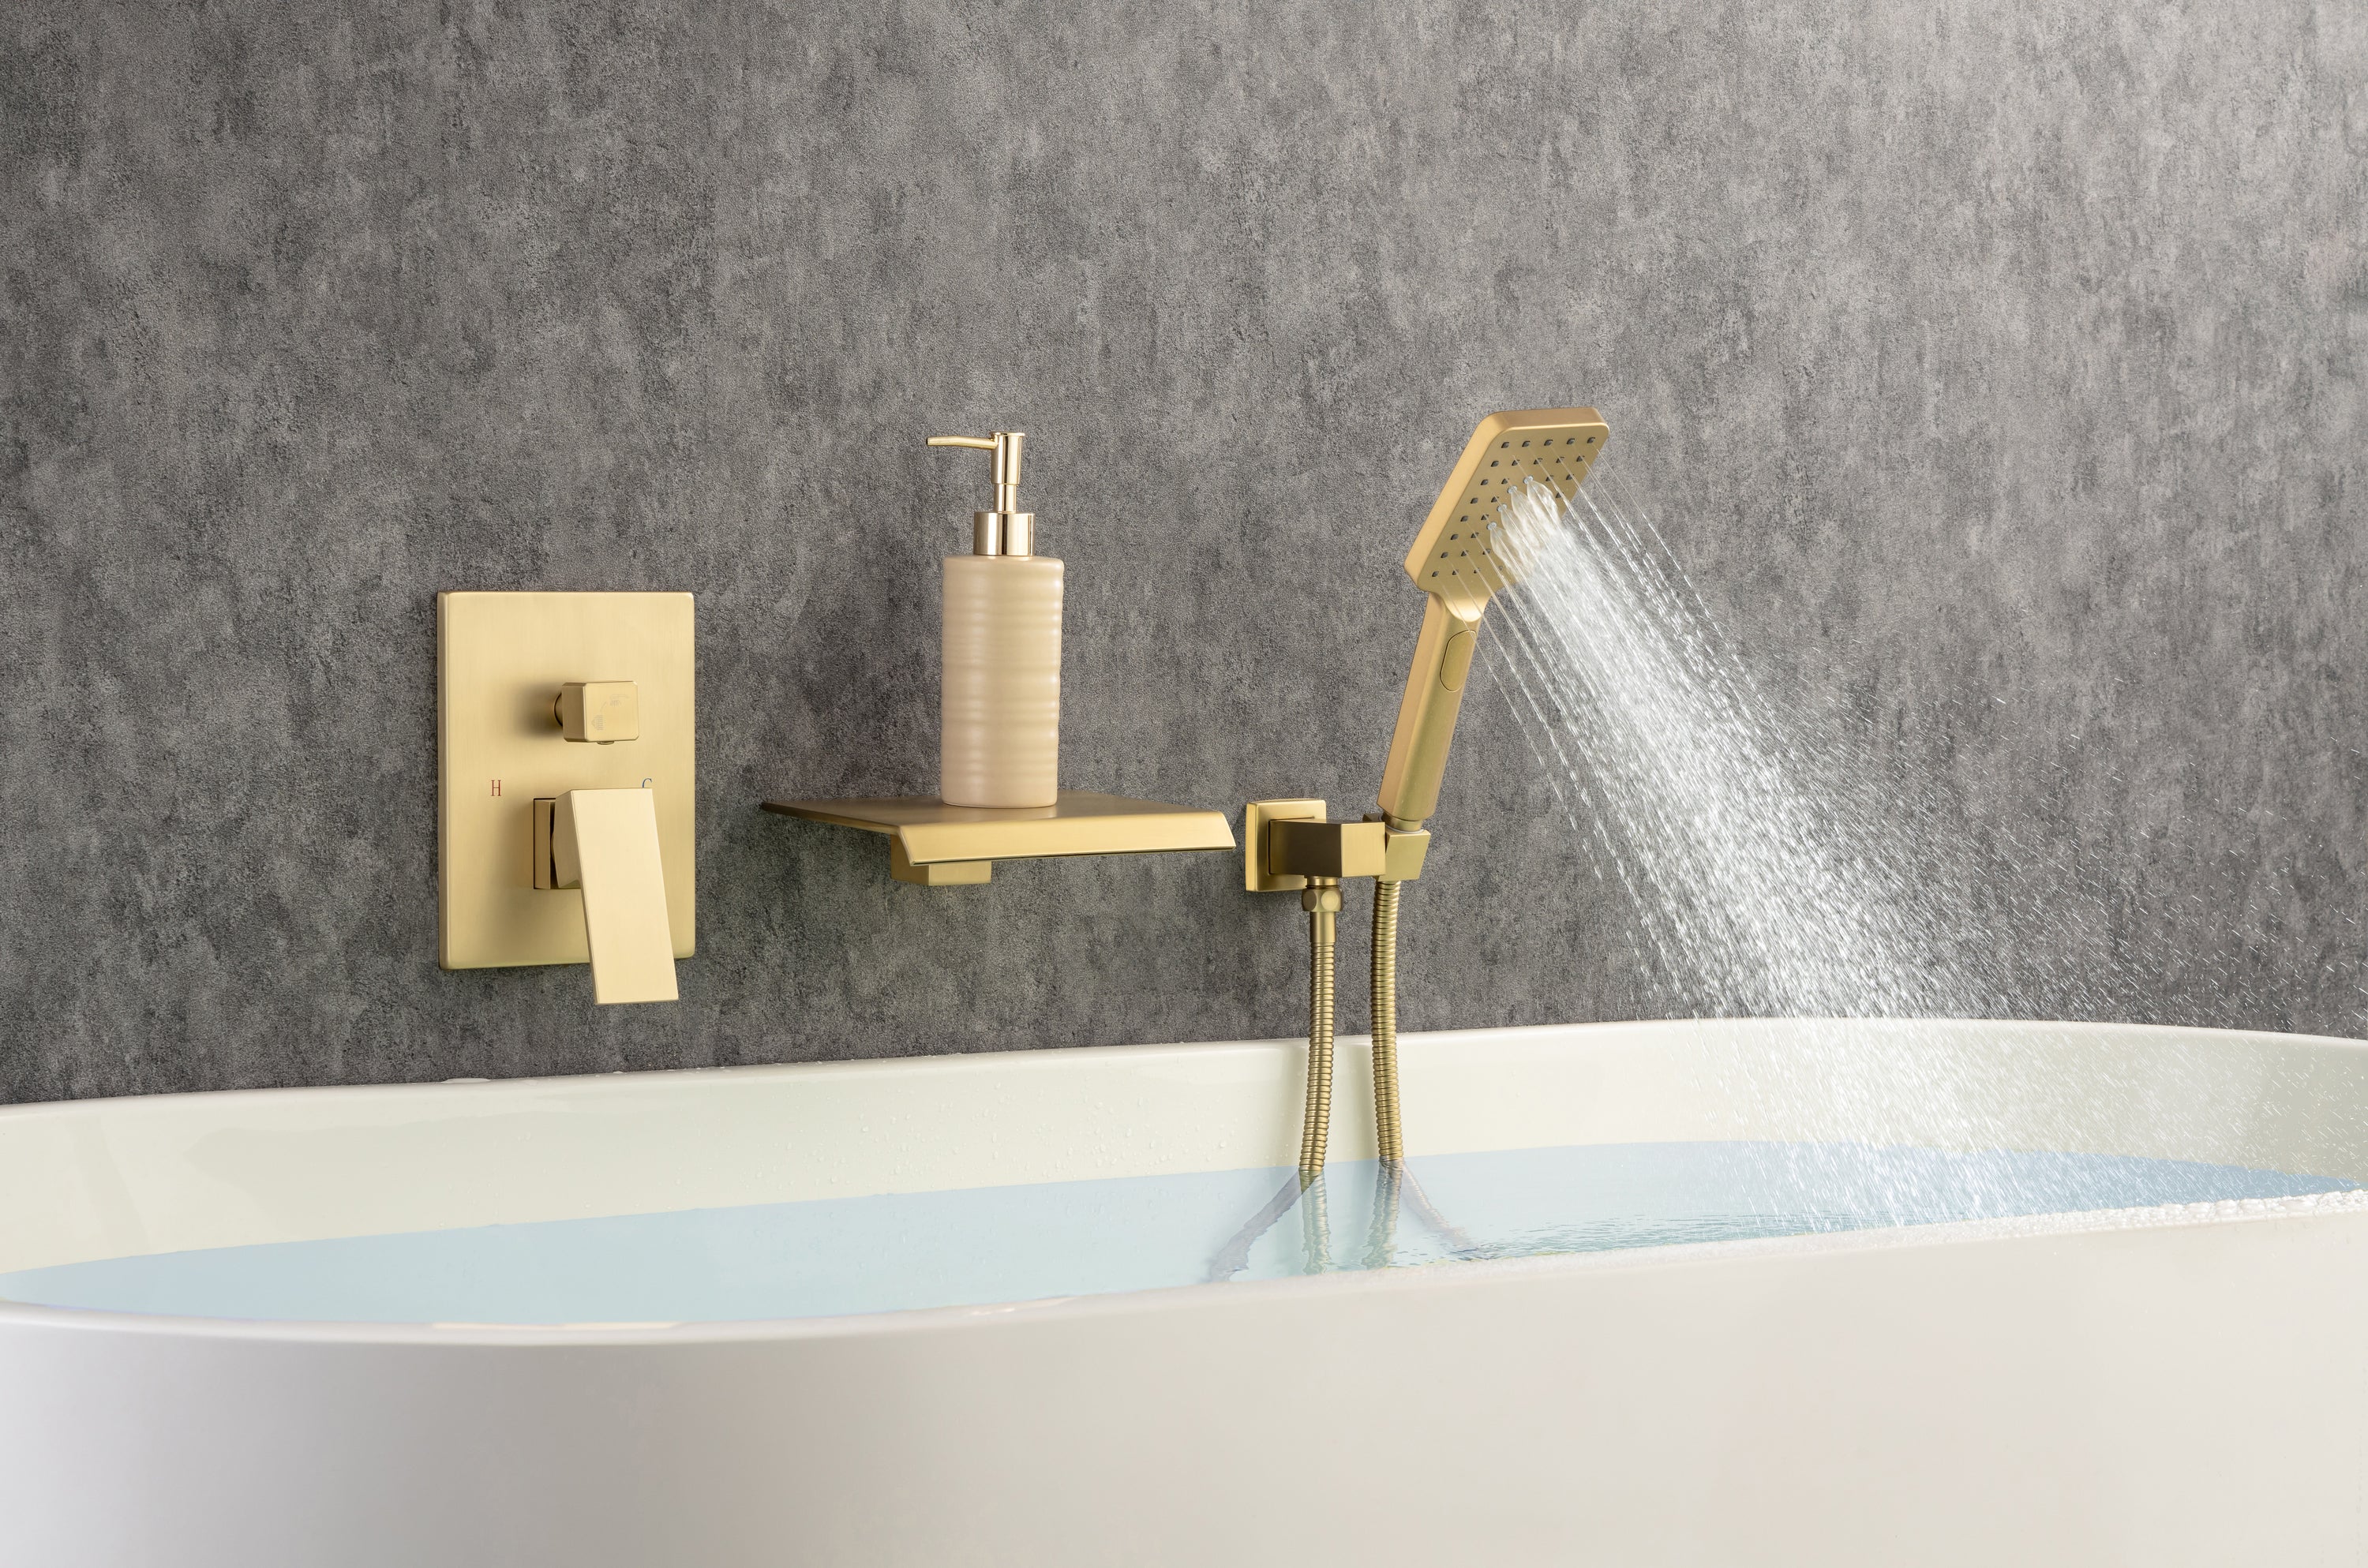 Waterfall Tub Faucet Wall Mount Roman Tub Filler Chrome Single Handle Brass Bathroom Bathtub Faucet with Hand Shower - Gold